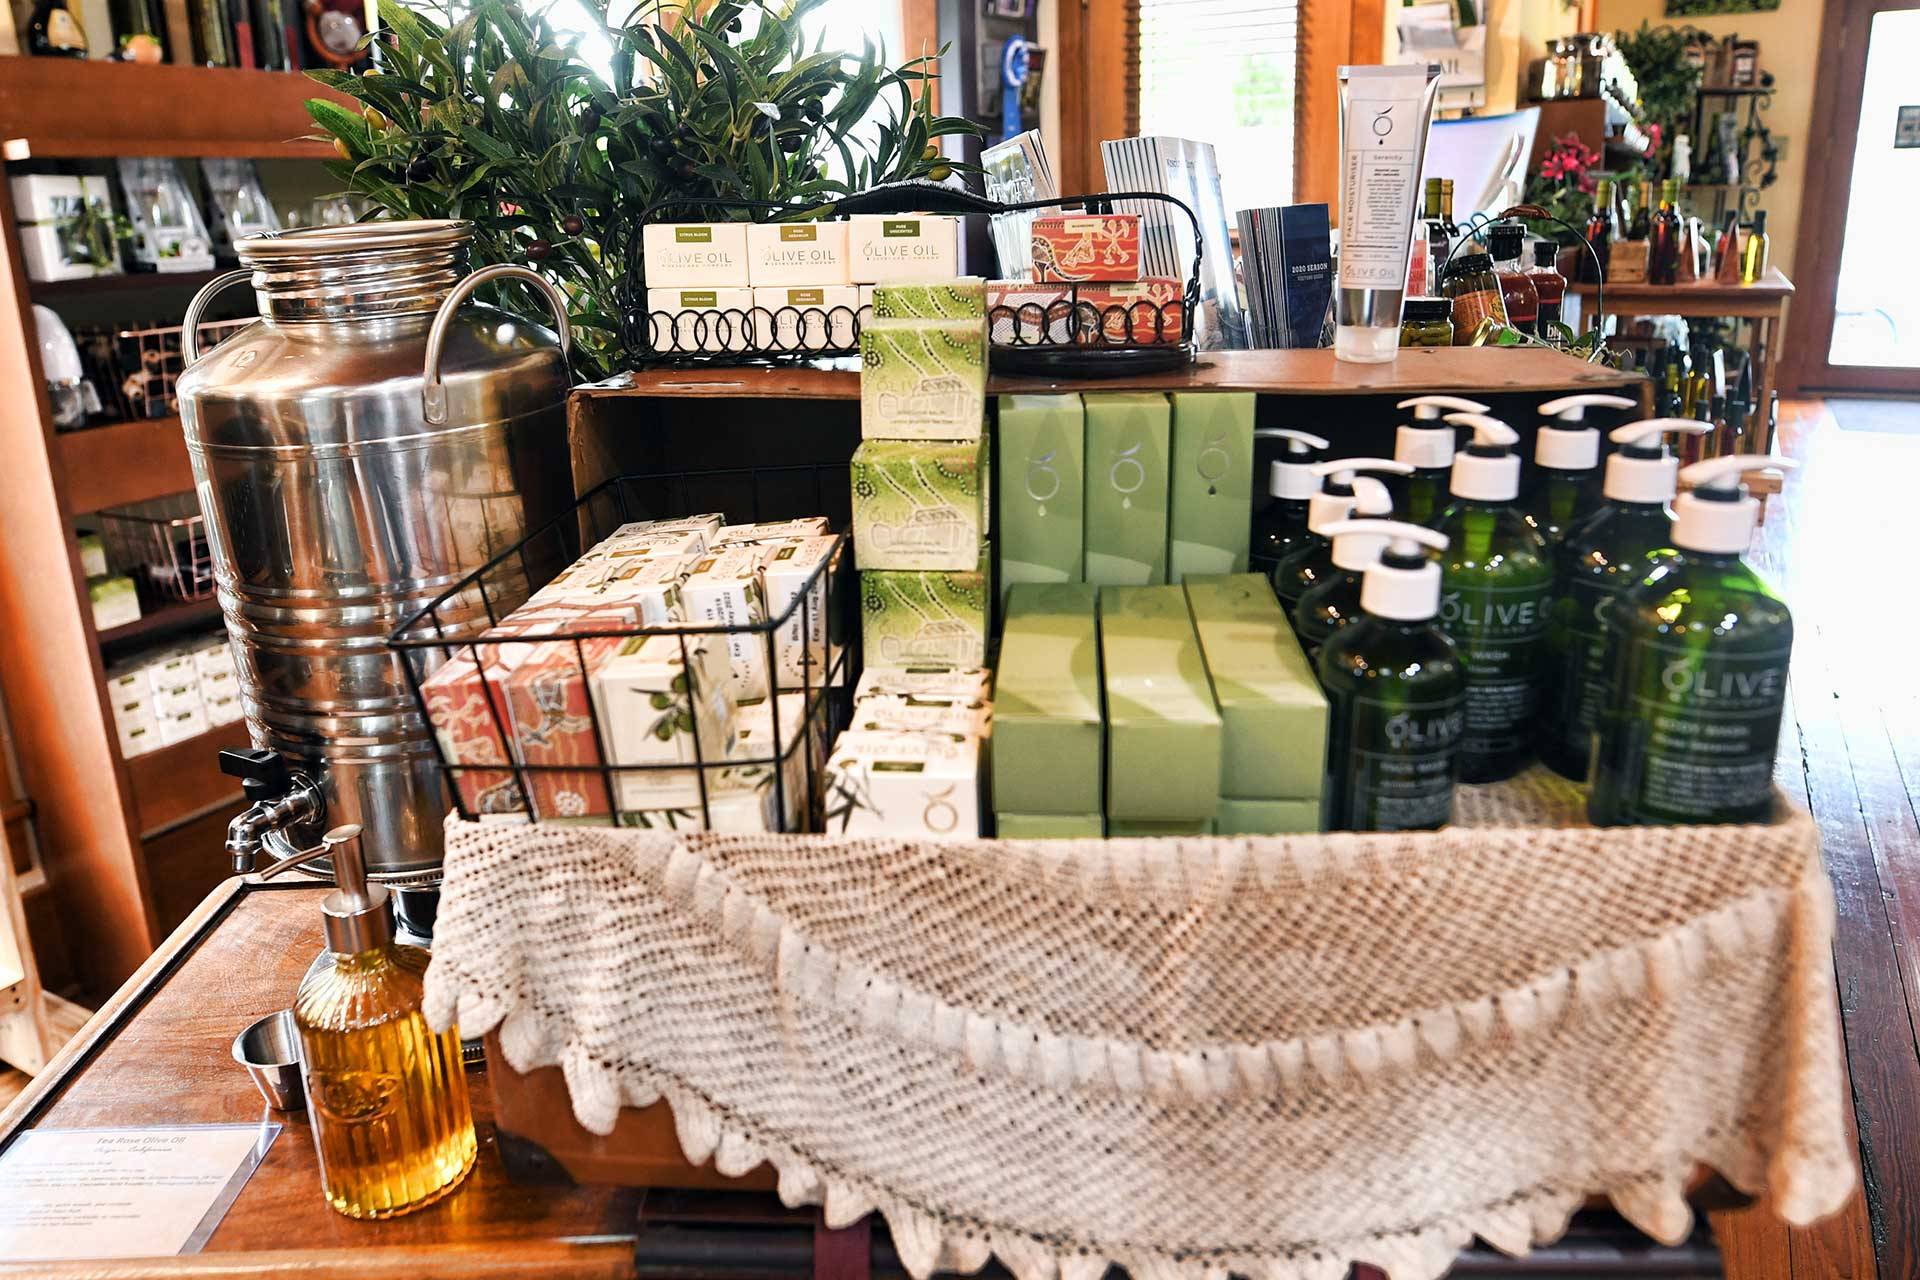 The Olive Oil Company skincare product display at The Olive Branch in Winona Lake, Indiana